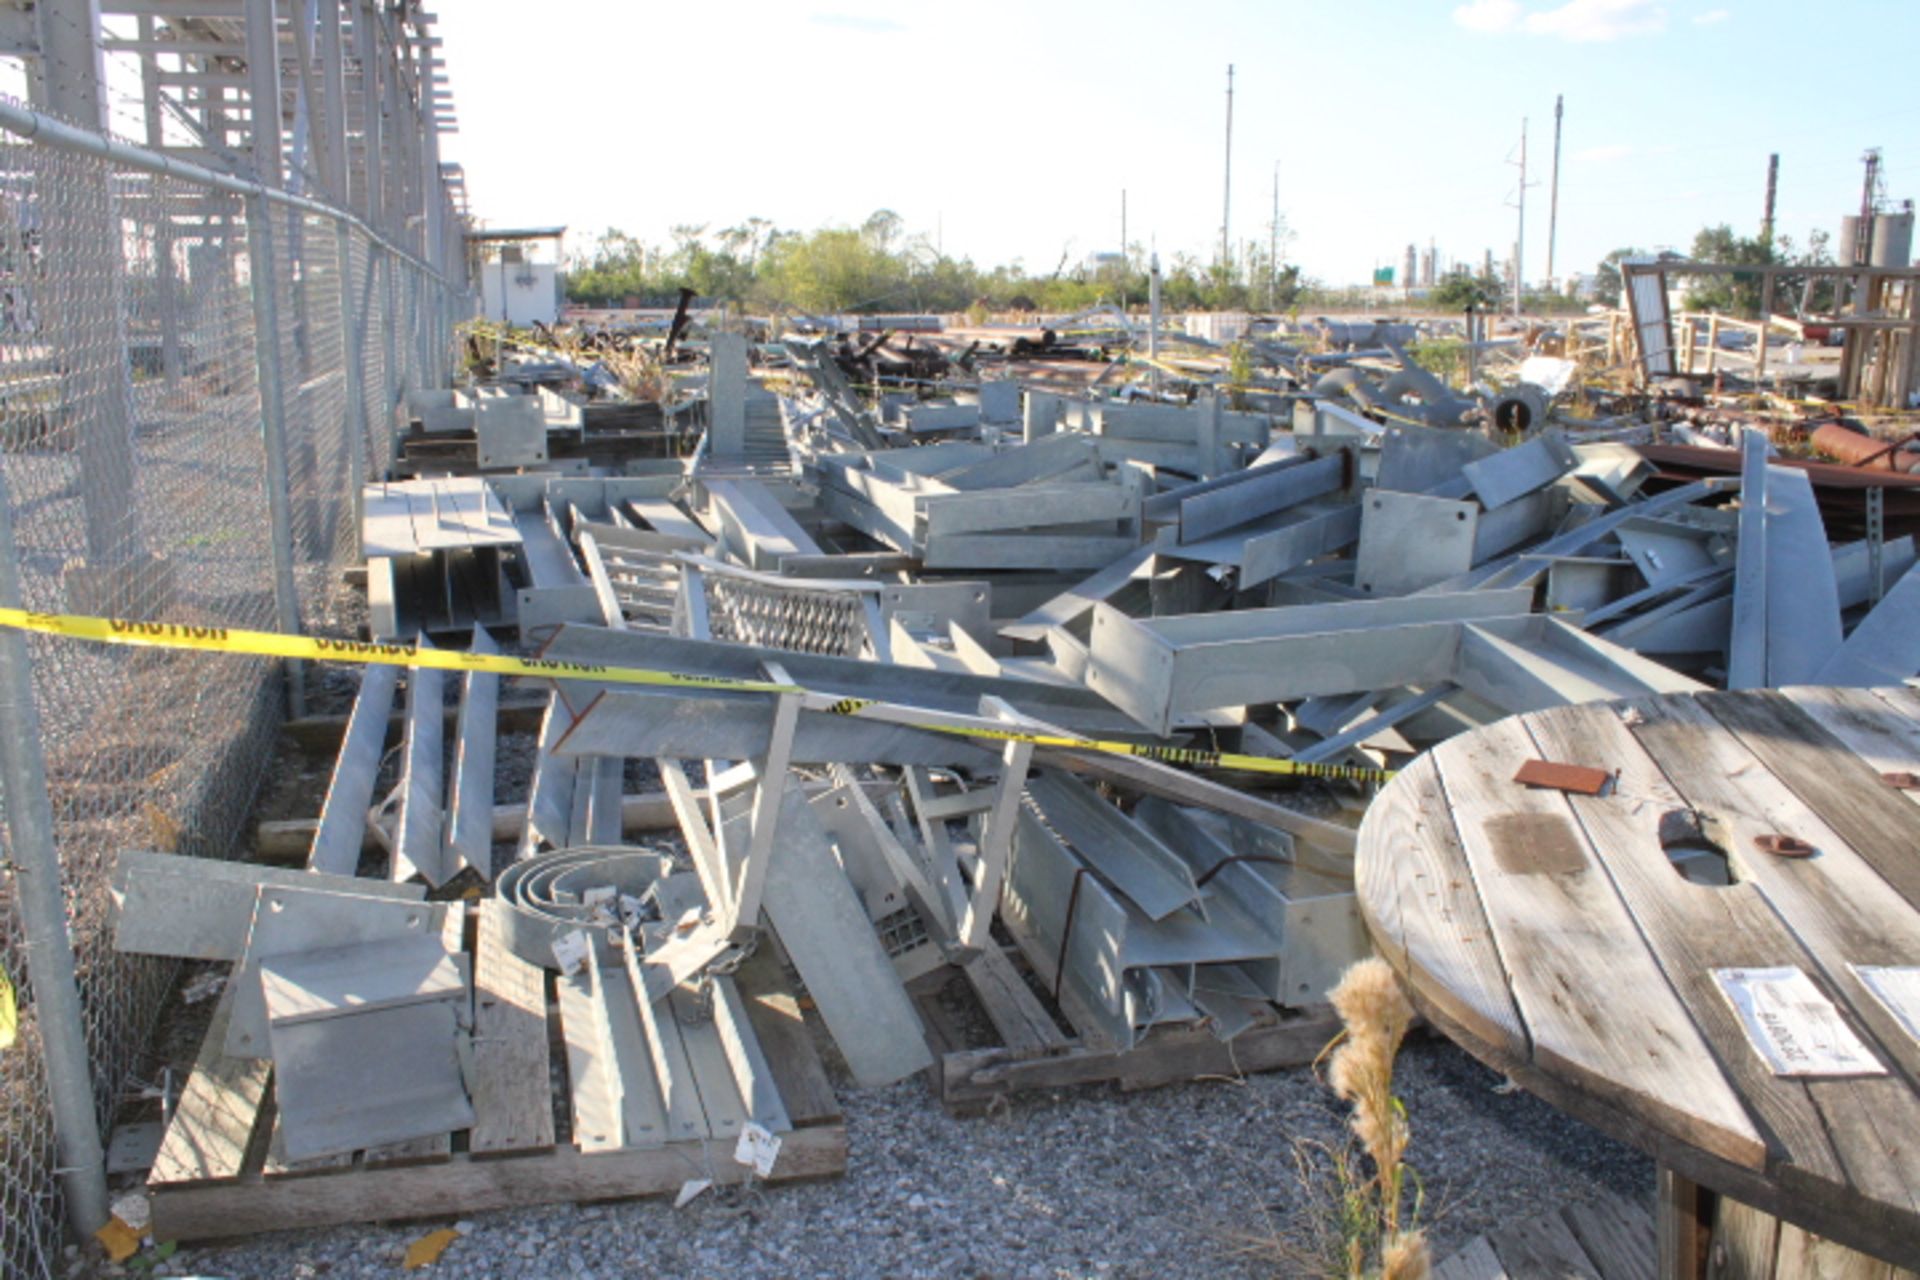 LOT CONSISTING OF: structural I-beams & in-process material (this lot will require third party